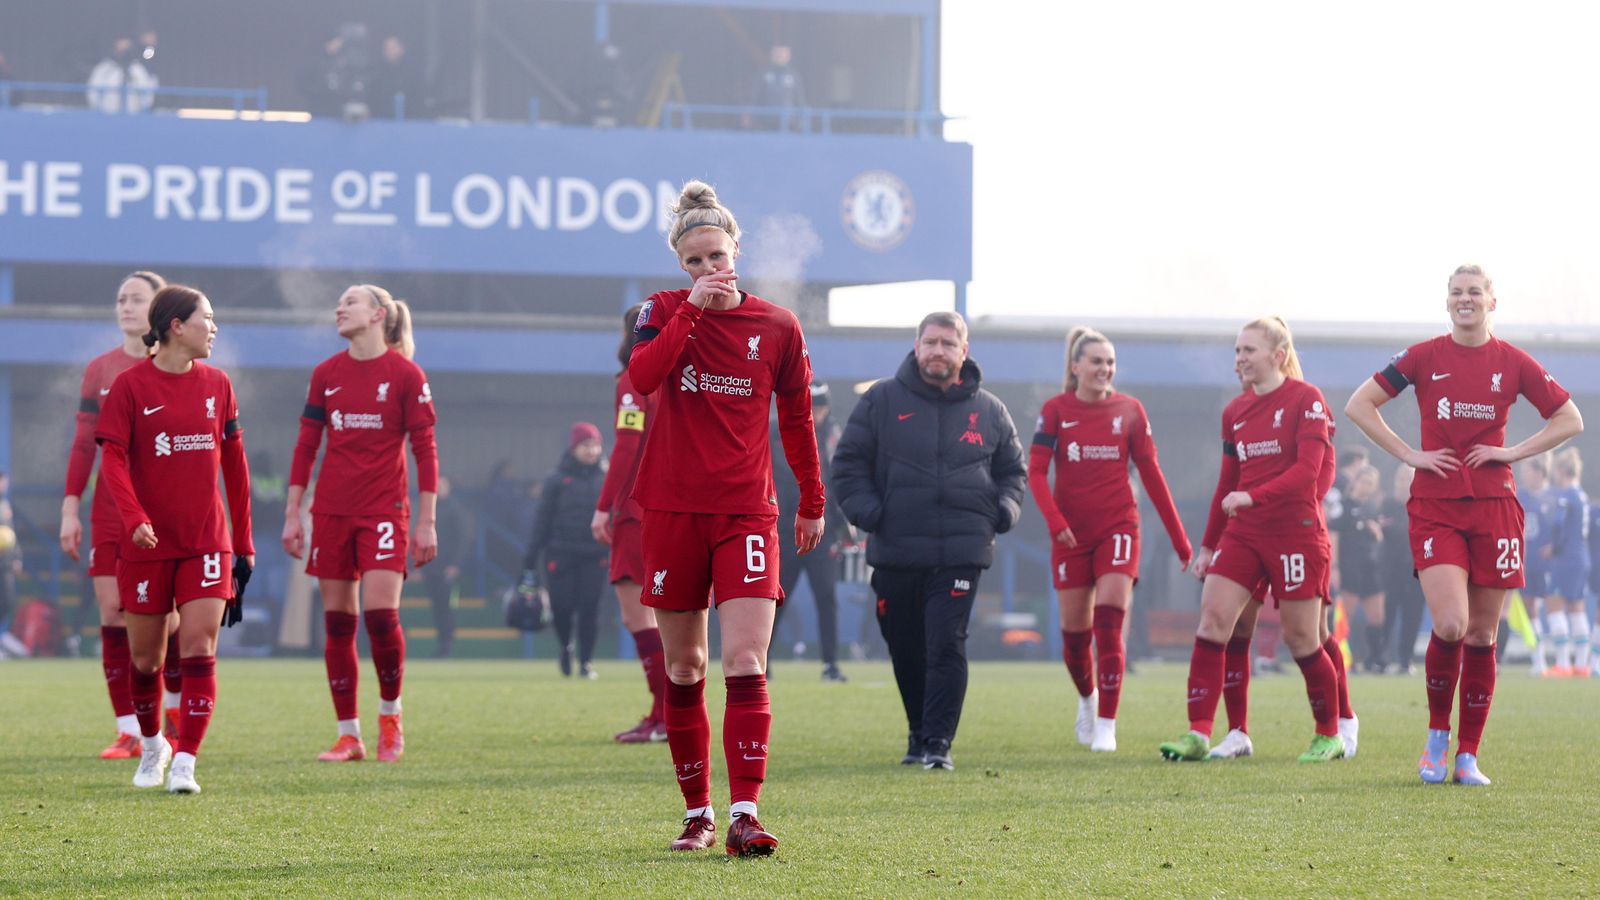 Chelsea Women vs Liverpool Women: WSL match abandoned after just six minutes due to frozen pitch